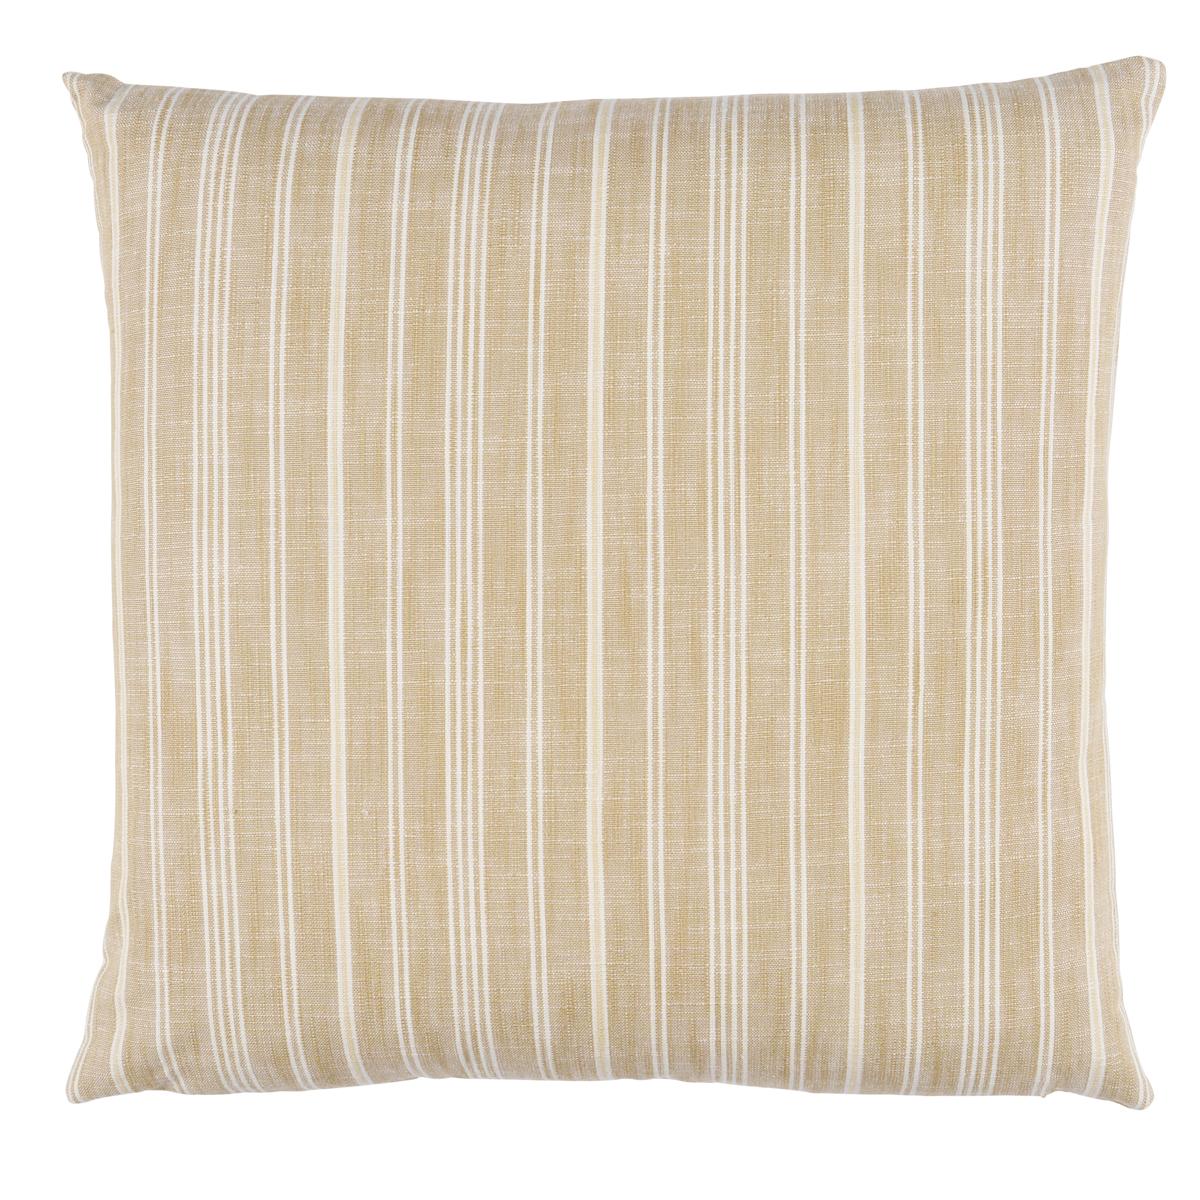 Lucy Stripe Pillow in Neutral 20 x 20" For Sale